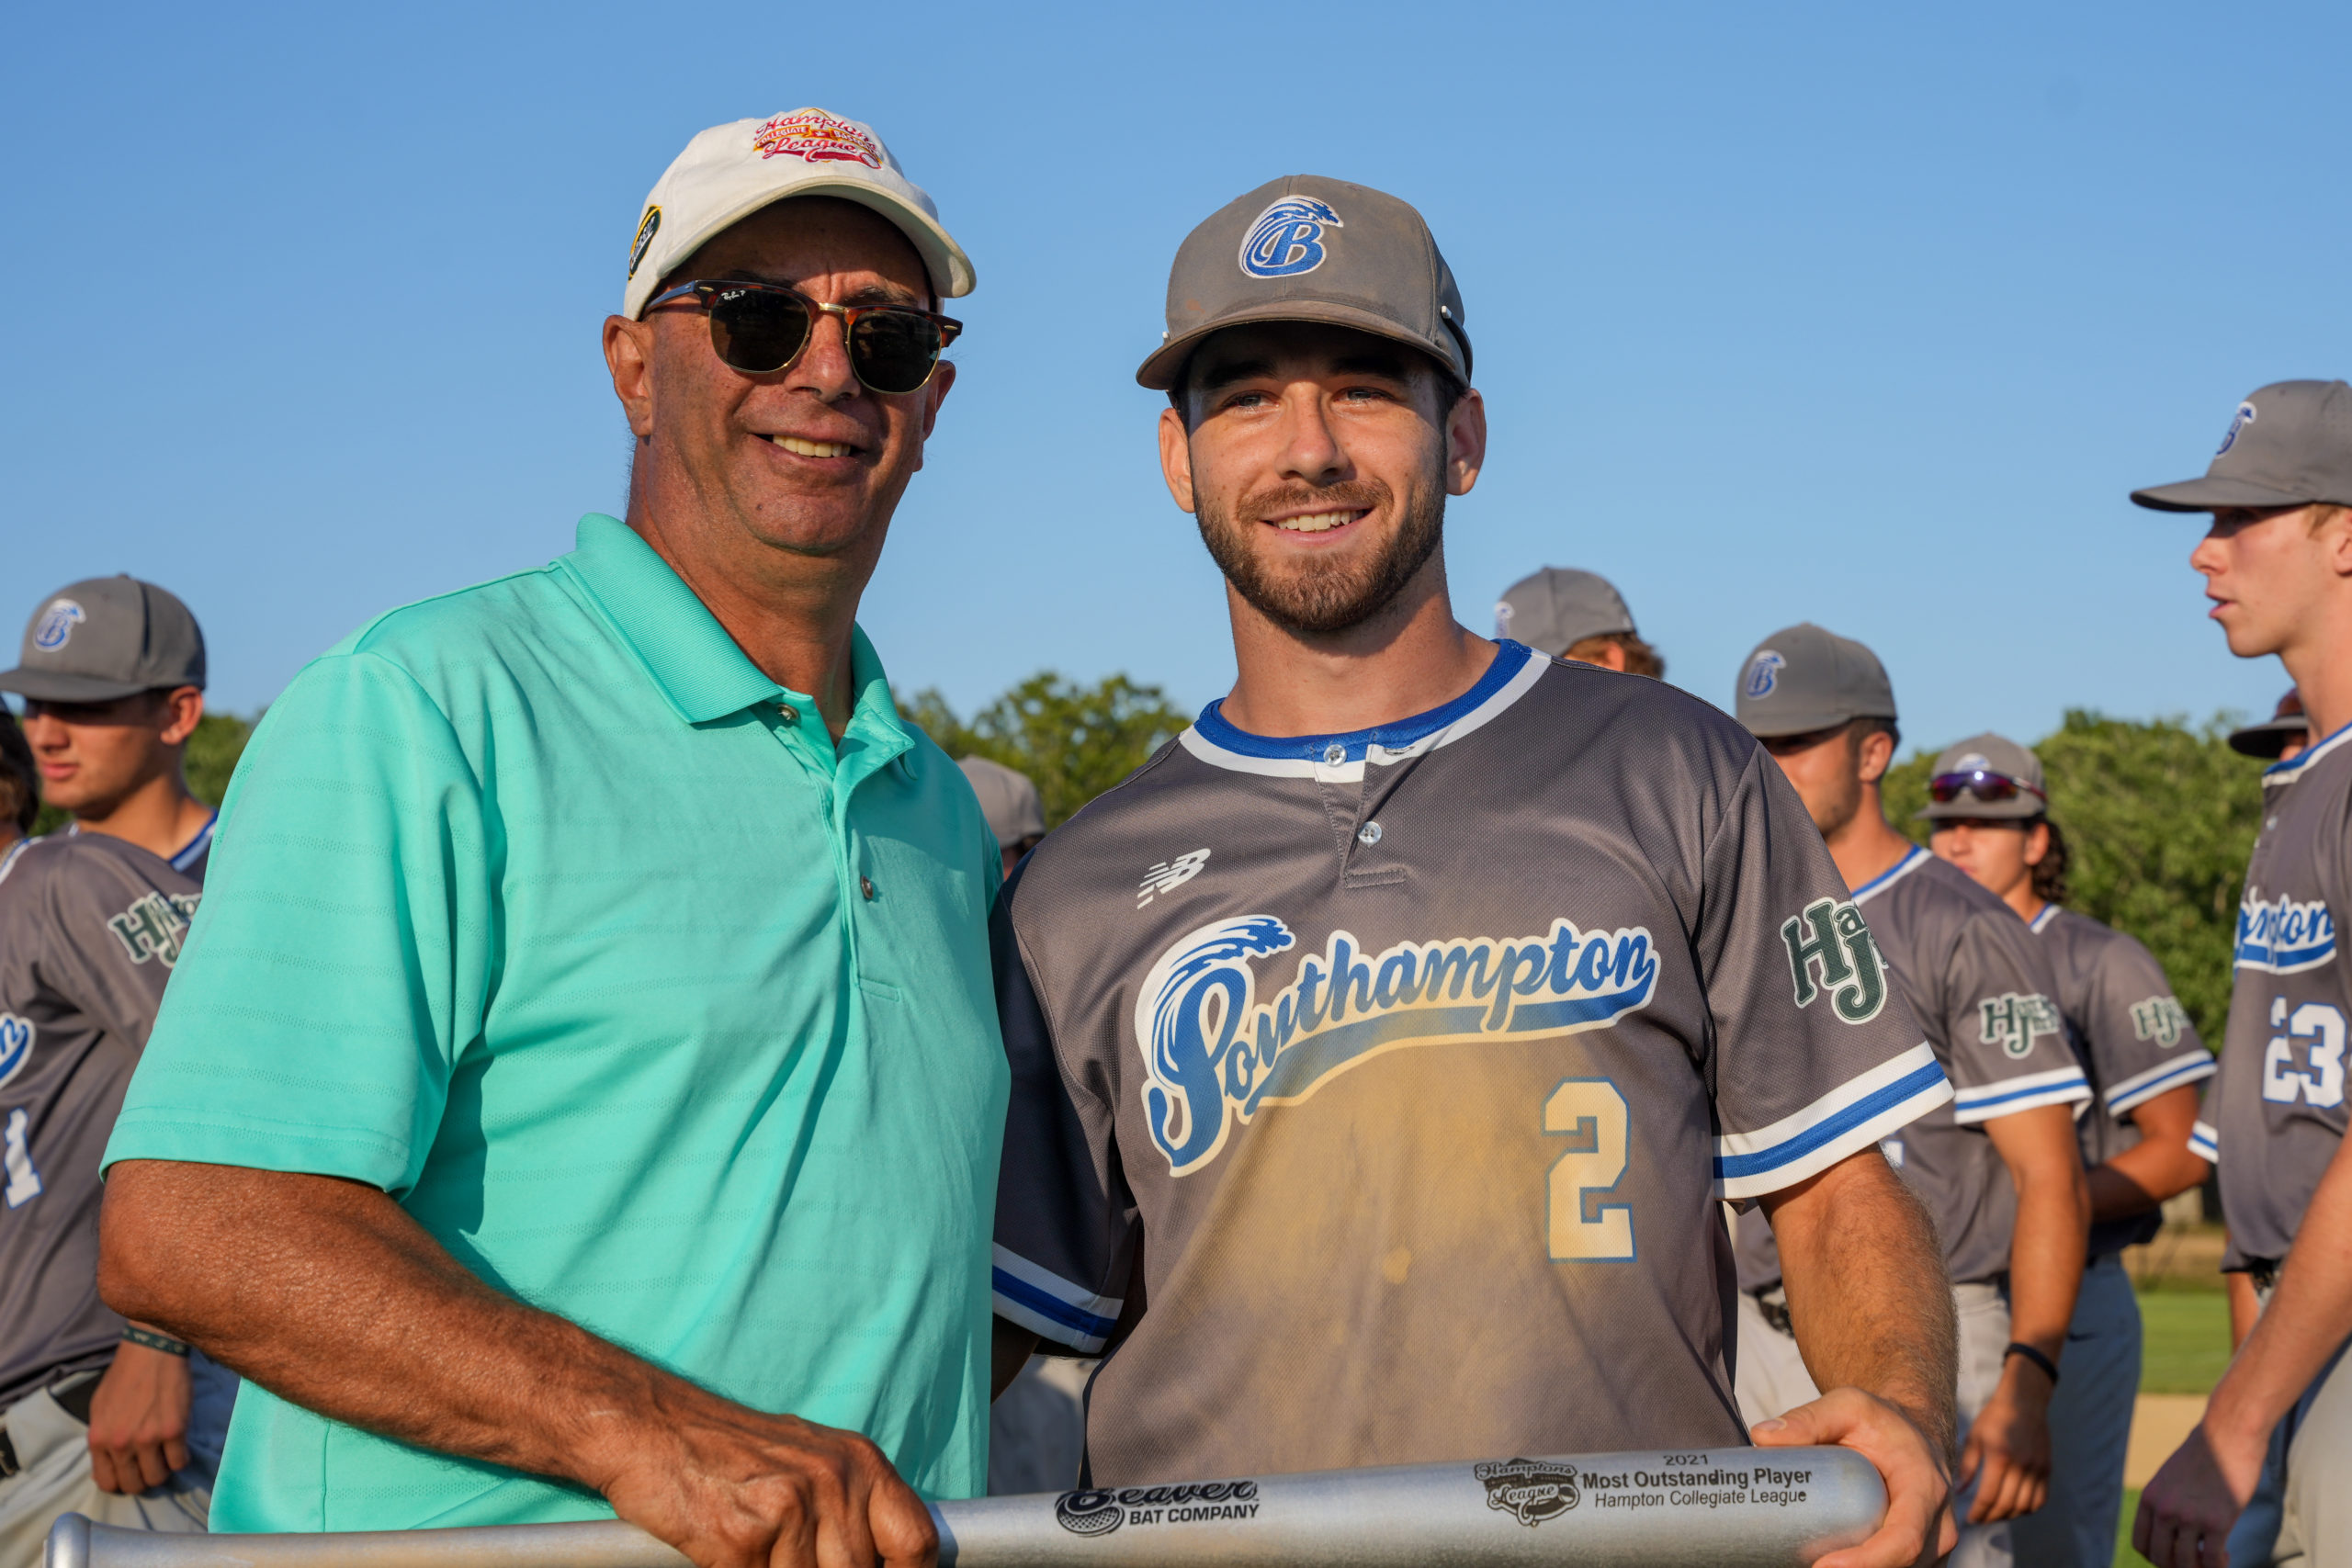 HCBL Commissioner Jim Pereira, left, with Southampton Breaker Will Gale (Seton Hall), who was named MVP of the HCBL Championship series.